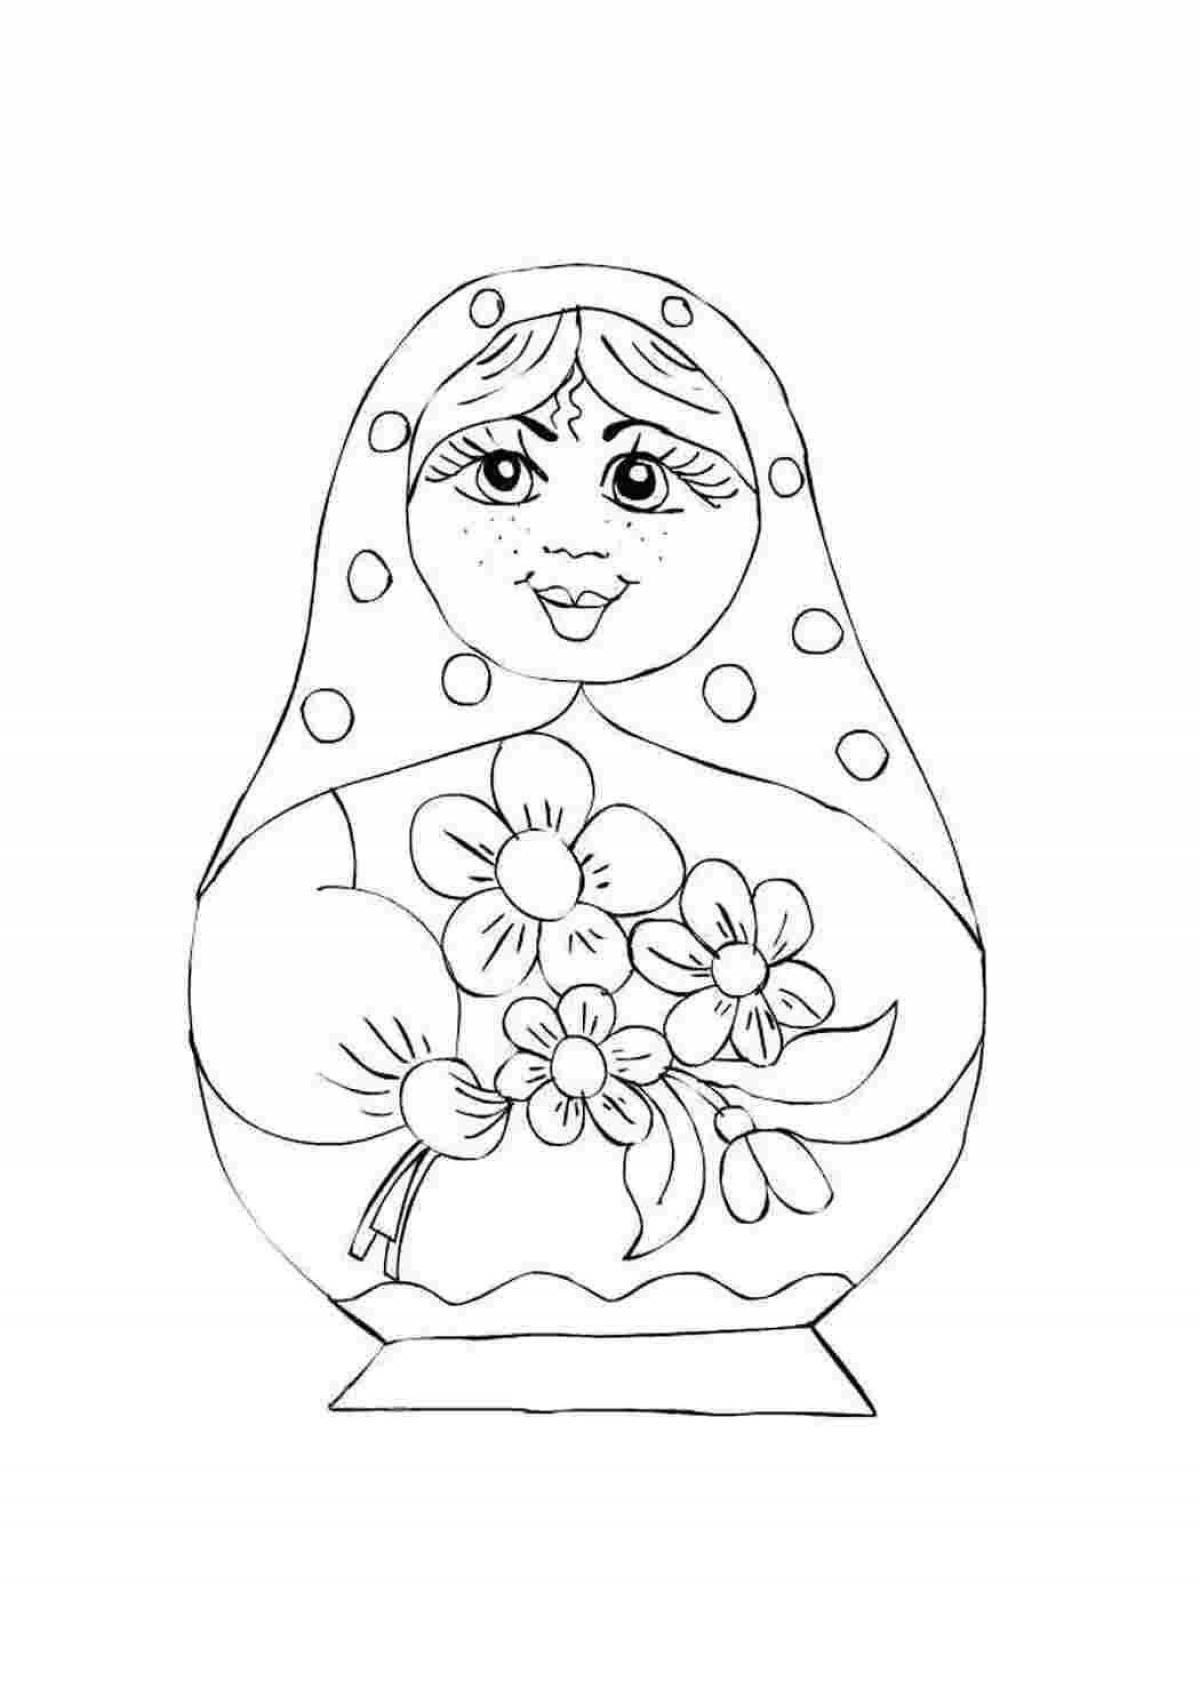 Adorable Russian matryoshka coloring book for 6-7 year olds